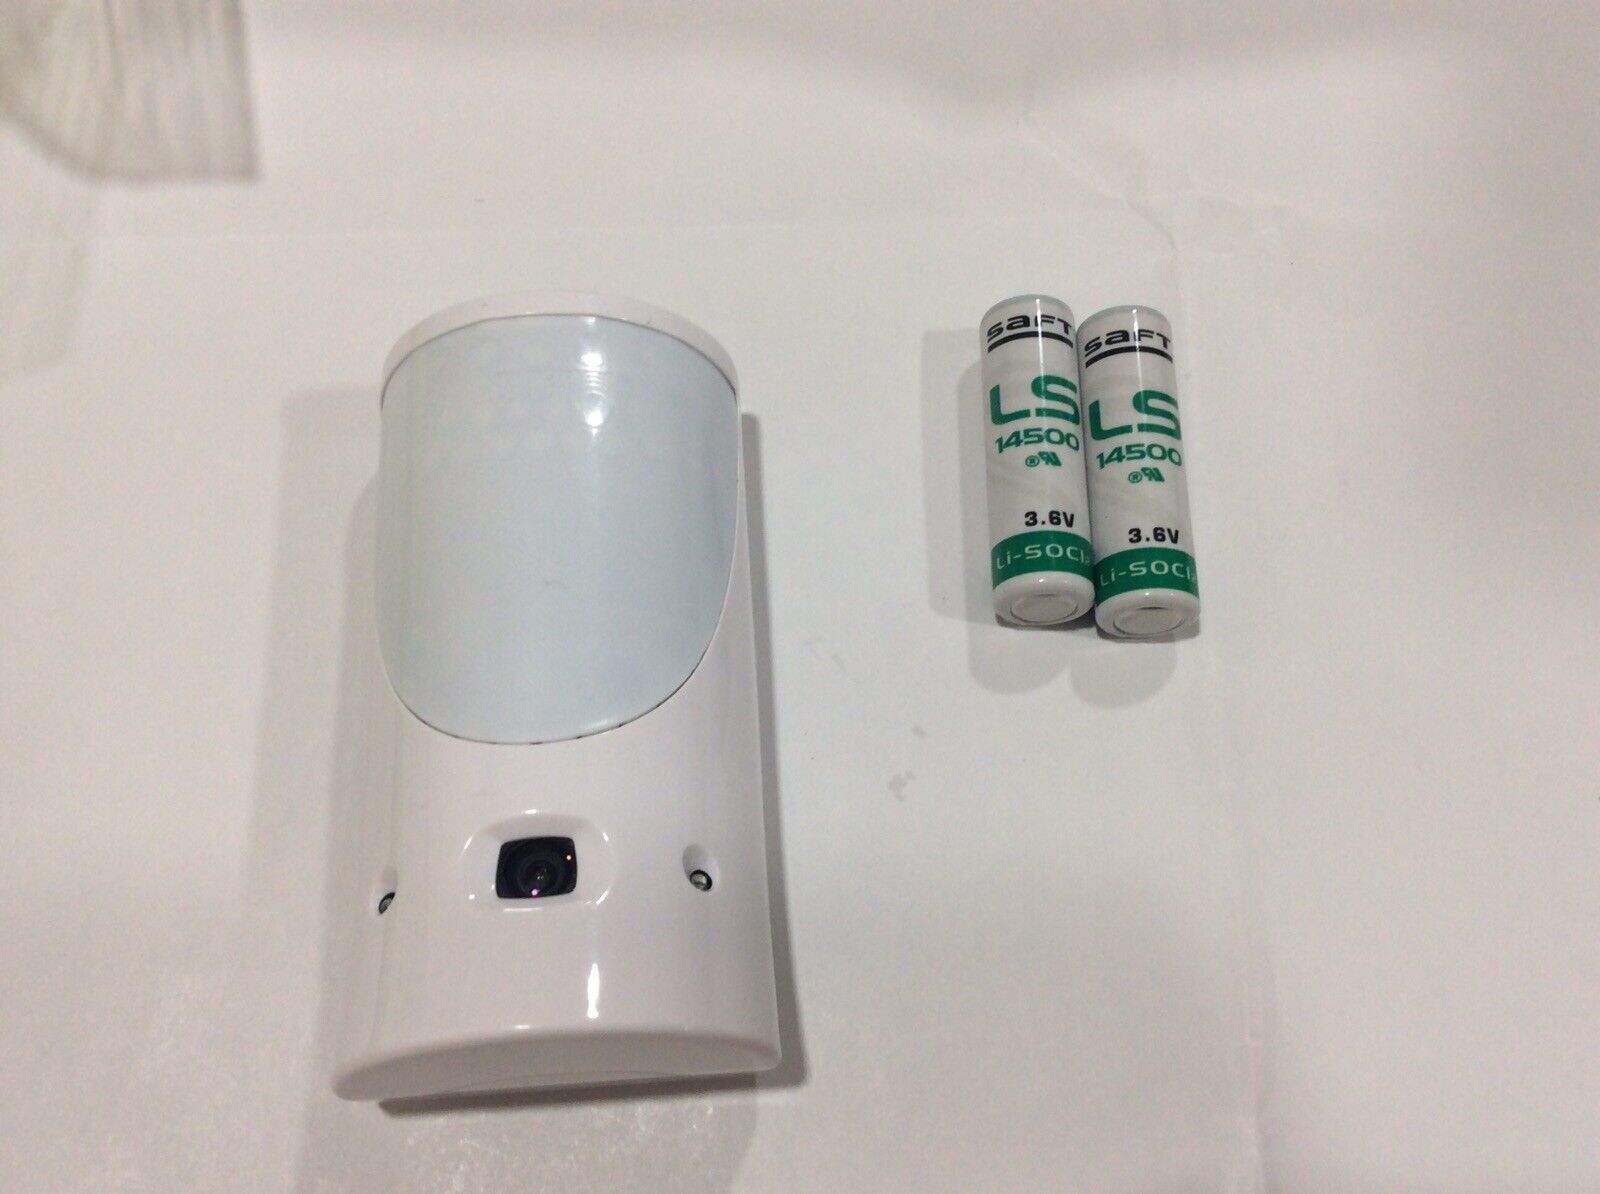 Rsi Video Technologies Imv601 Smart Indoor Motionviewer Security Camera - Used